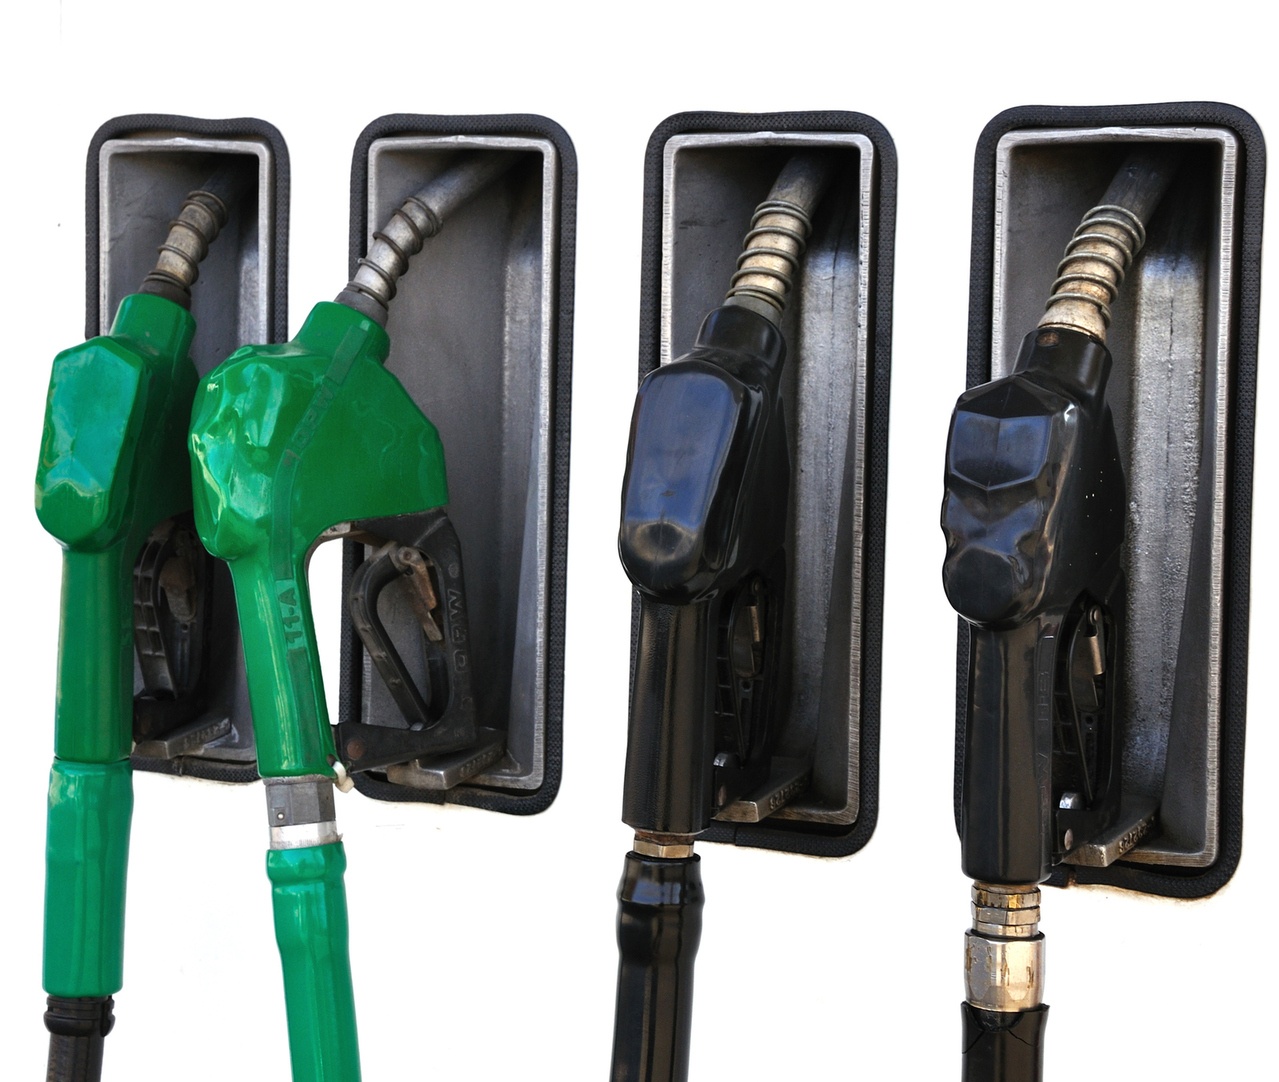 How does a fuel management system work?